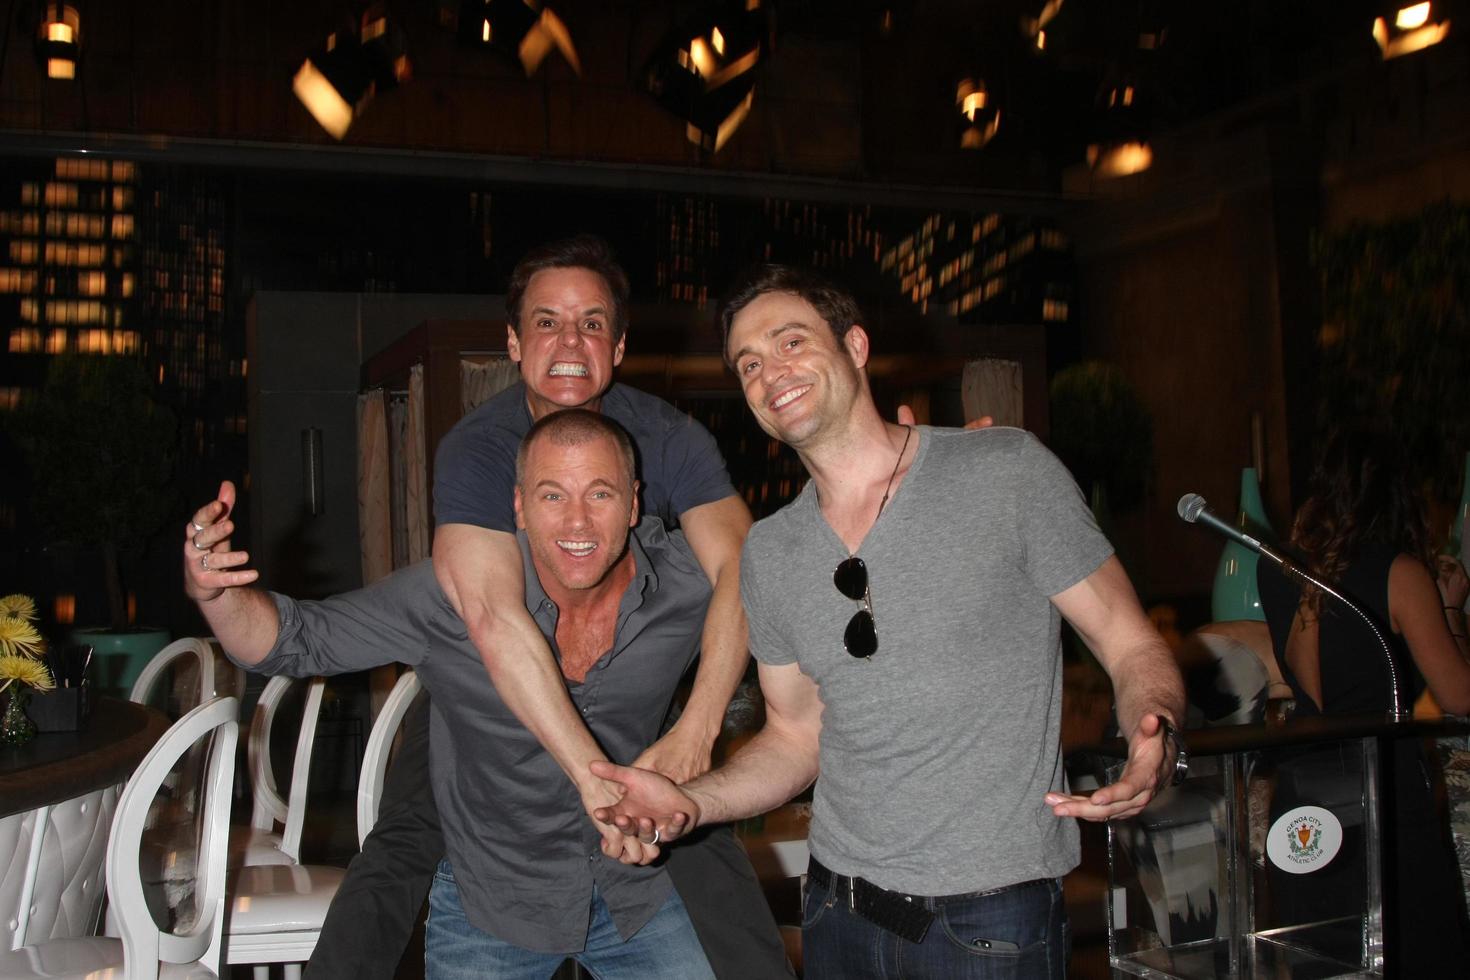 LOS ANGELES, MAR 26 - Christian LeBlanc, Sean Carrigan, Daniel Goddard at the Young and Restless 42nd Anniversary Celebration at the CBS Television City on March 26, 2015 in Los Angeles, CA photo